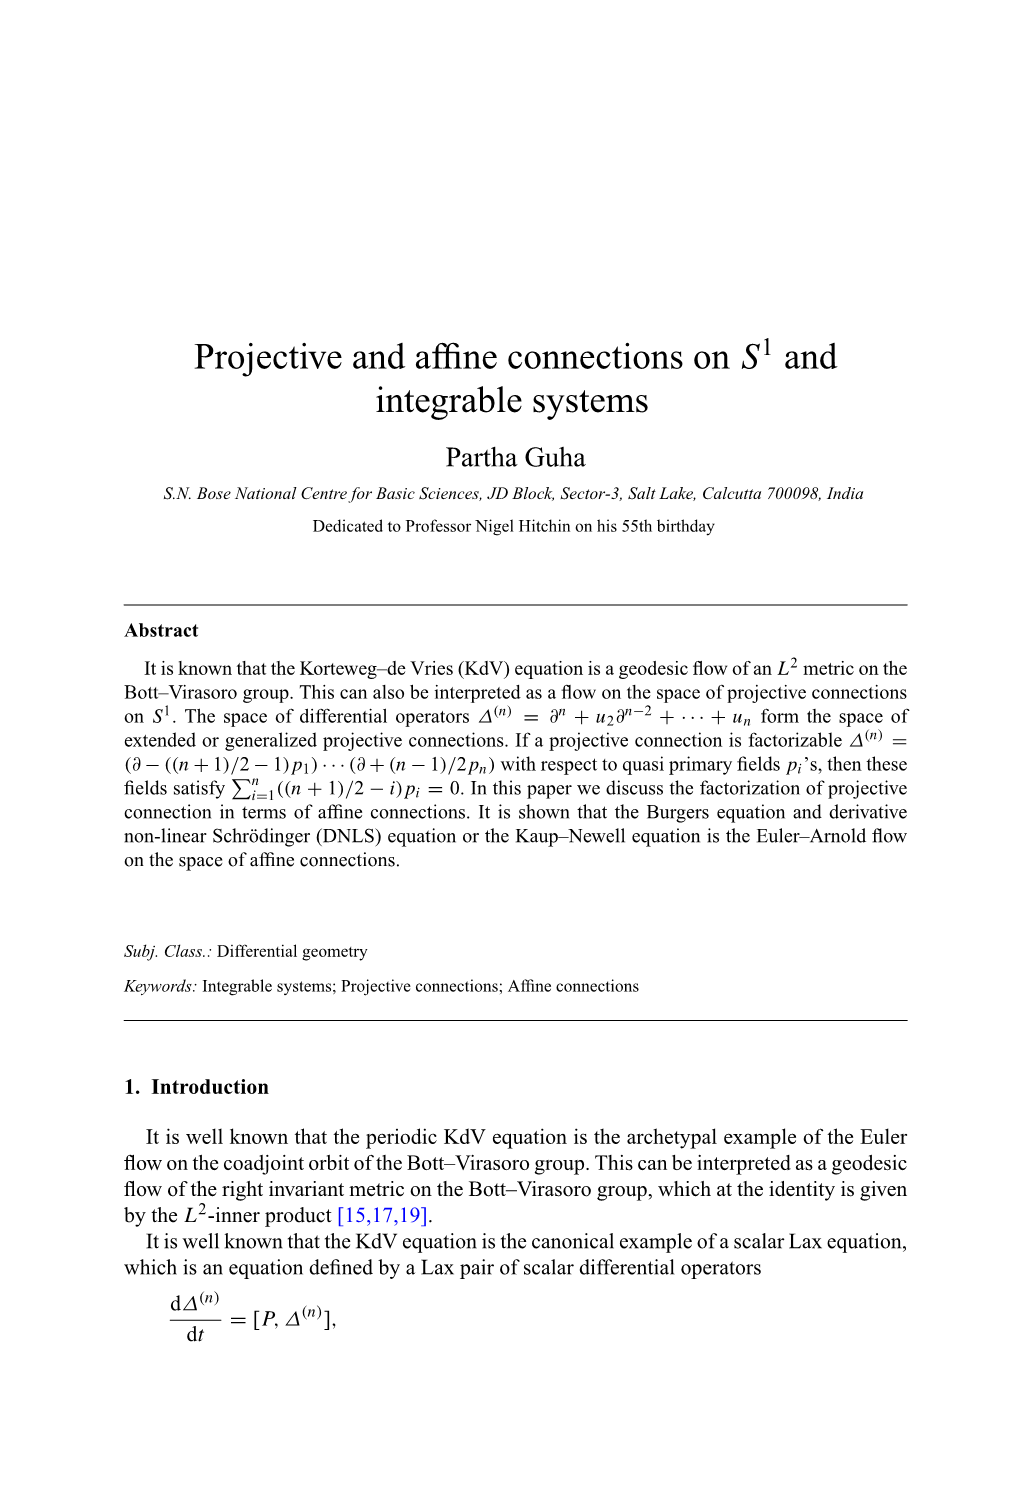 Projective and Affine Connections on S1 and Integrable Systems